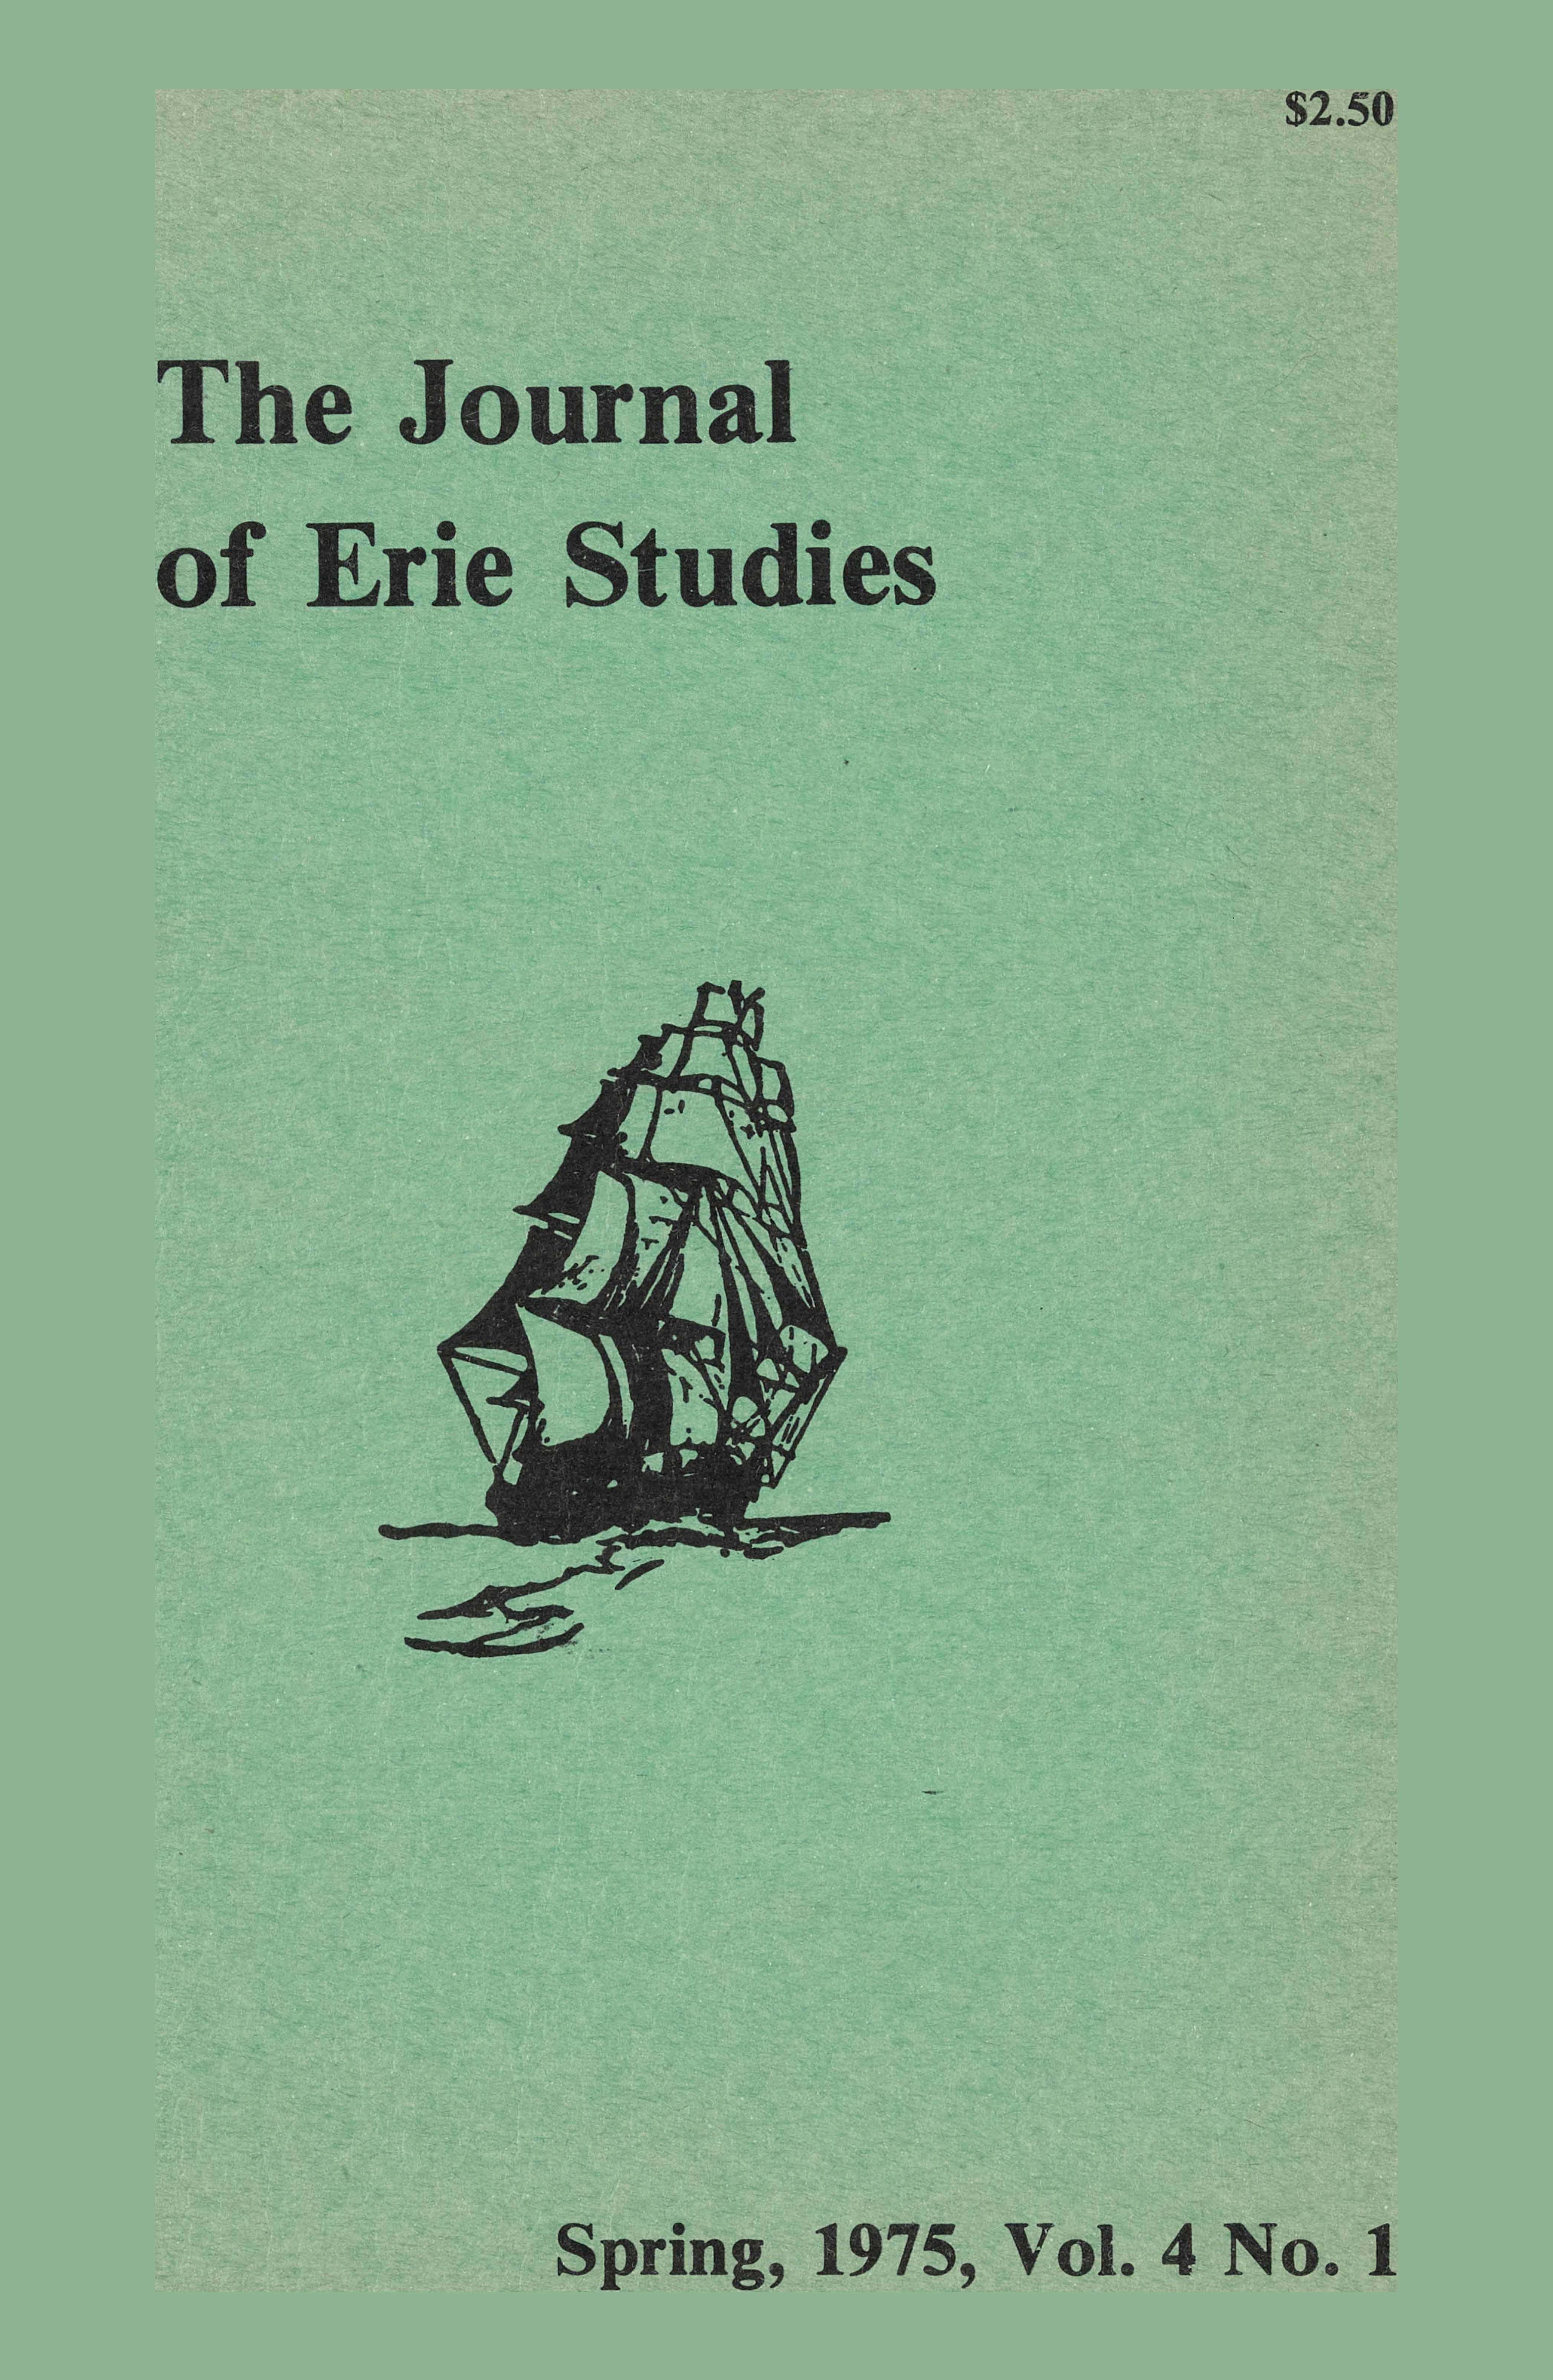 Cover of the spring 1975 issue of The Journal of Erie Studies.